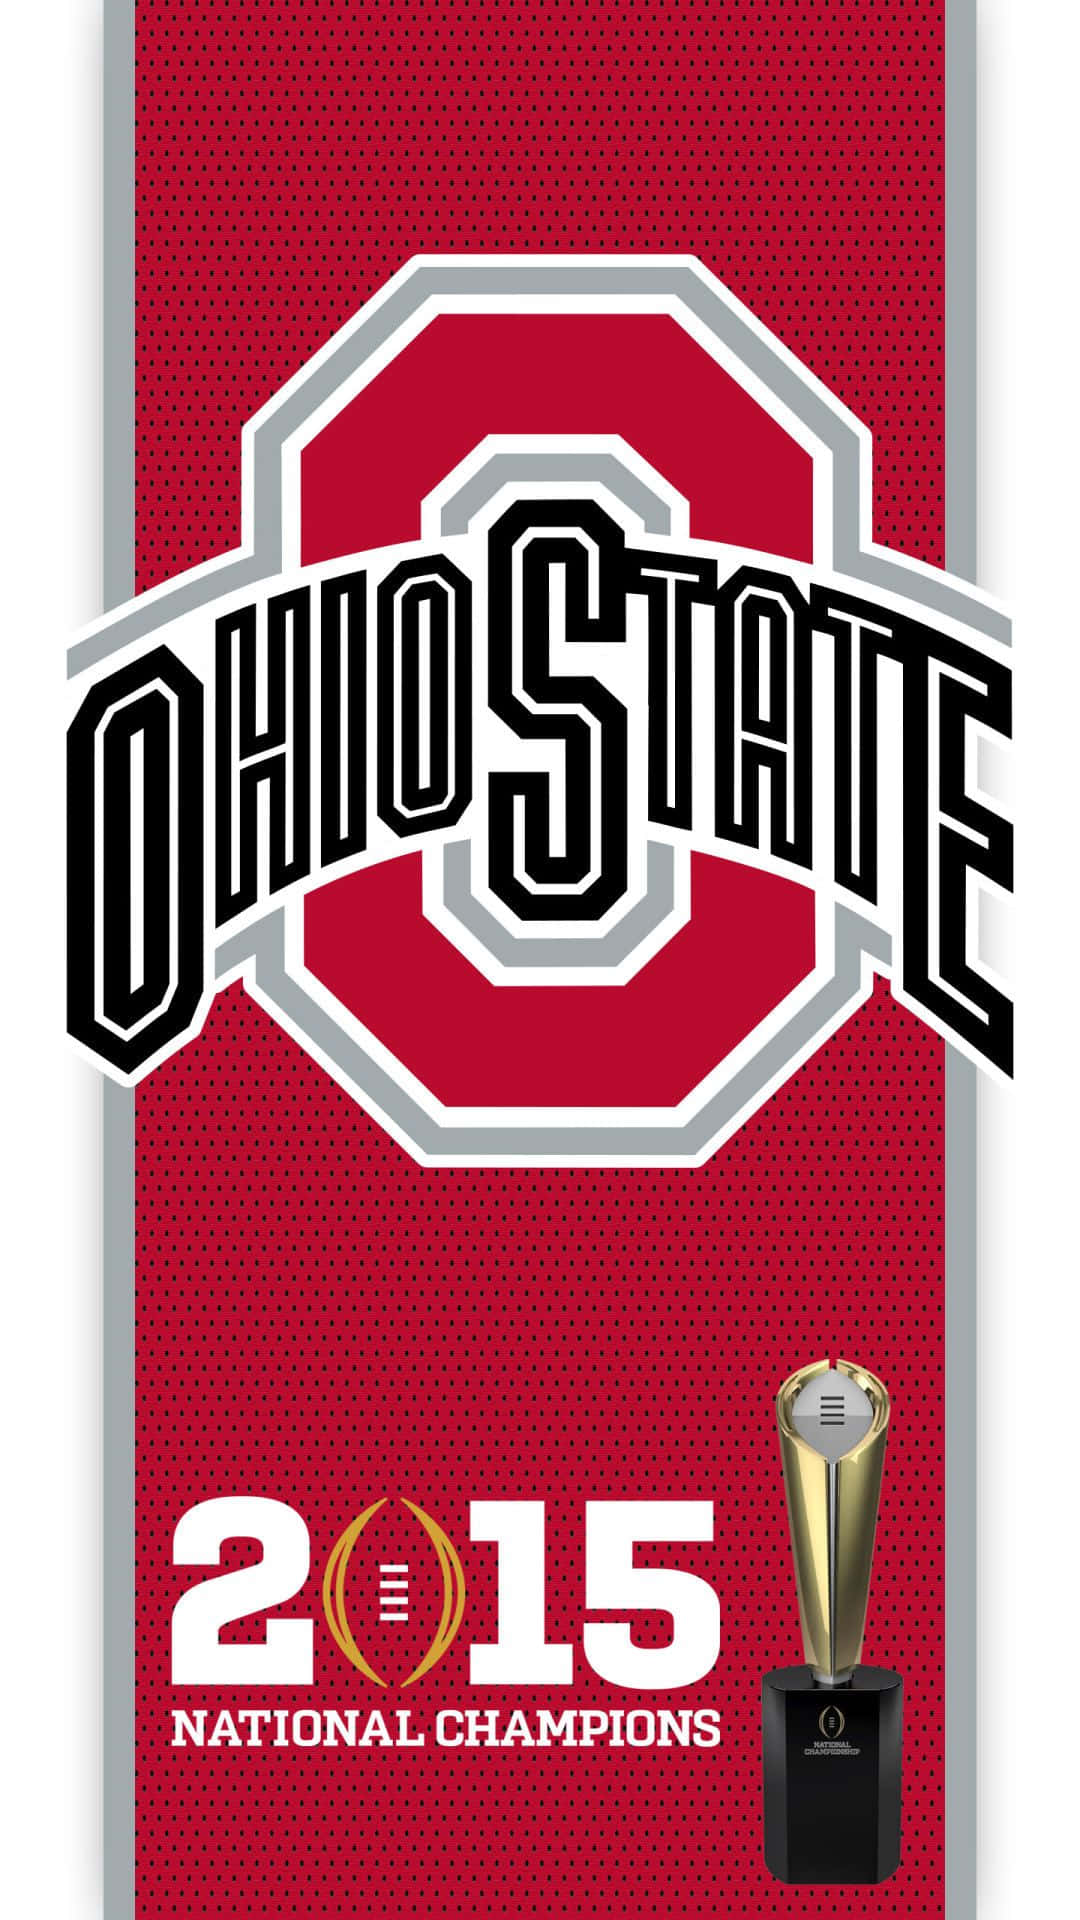 Pin on OHIO STATE PHONE WALLPAPERS